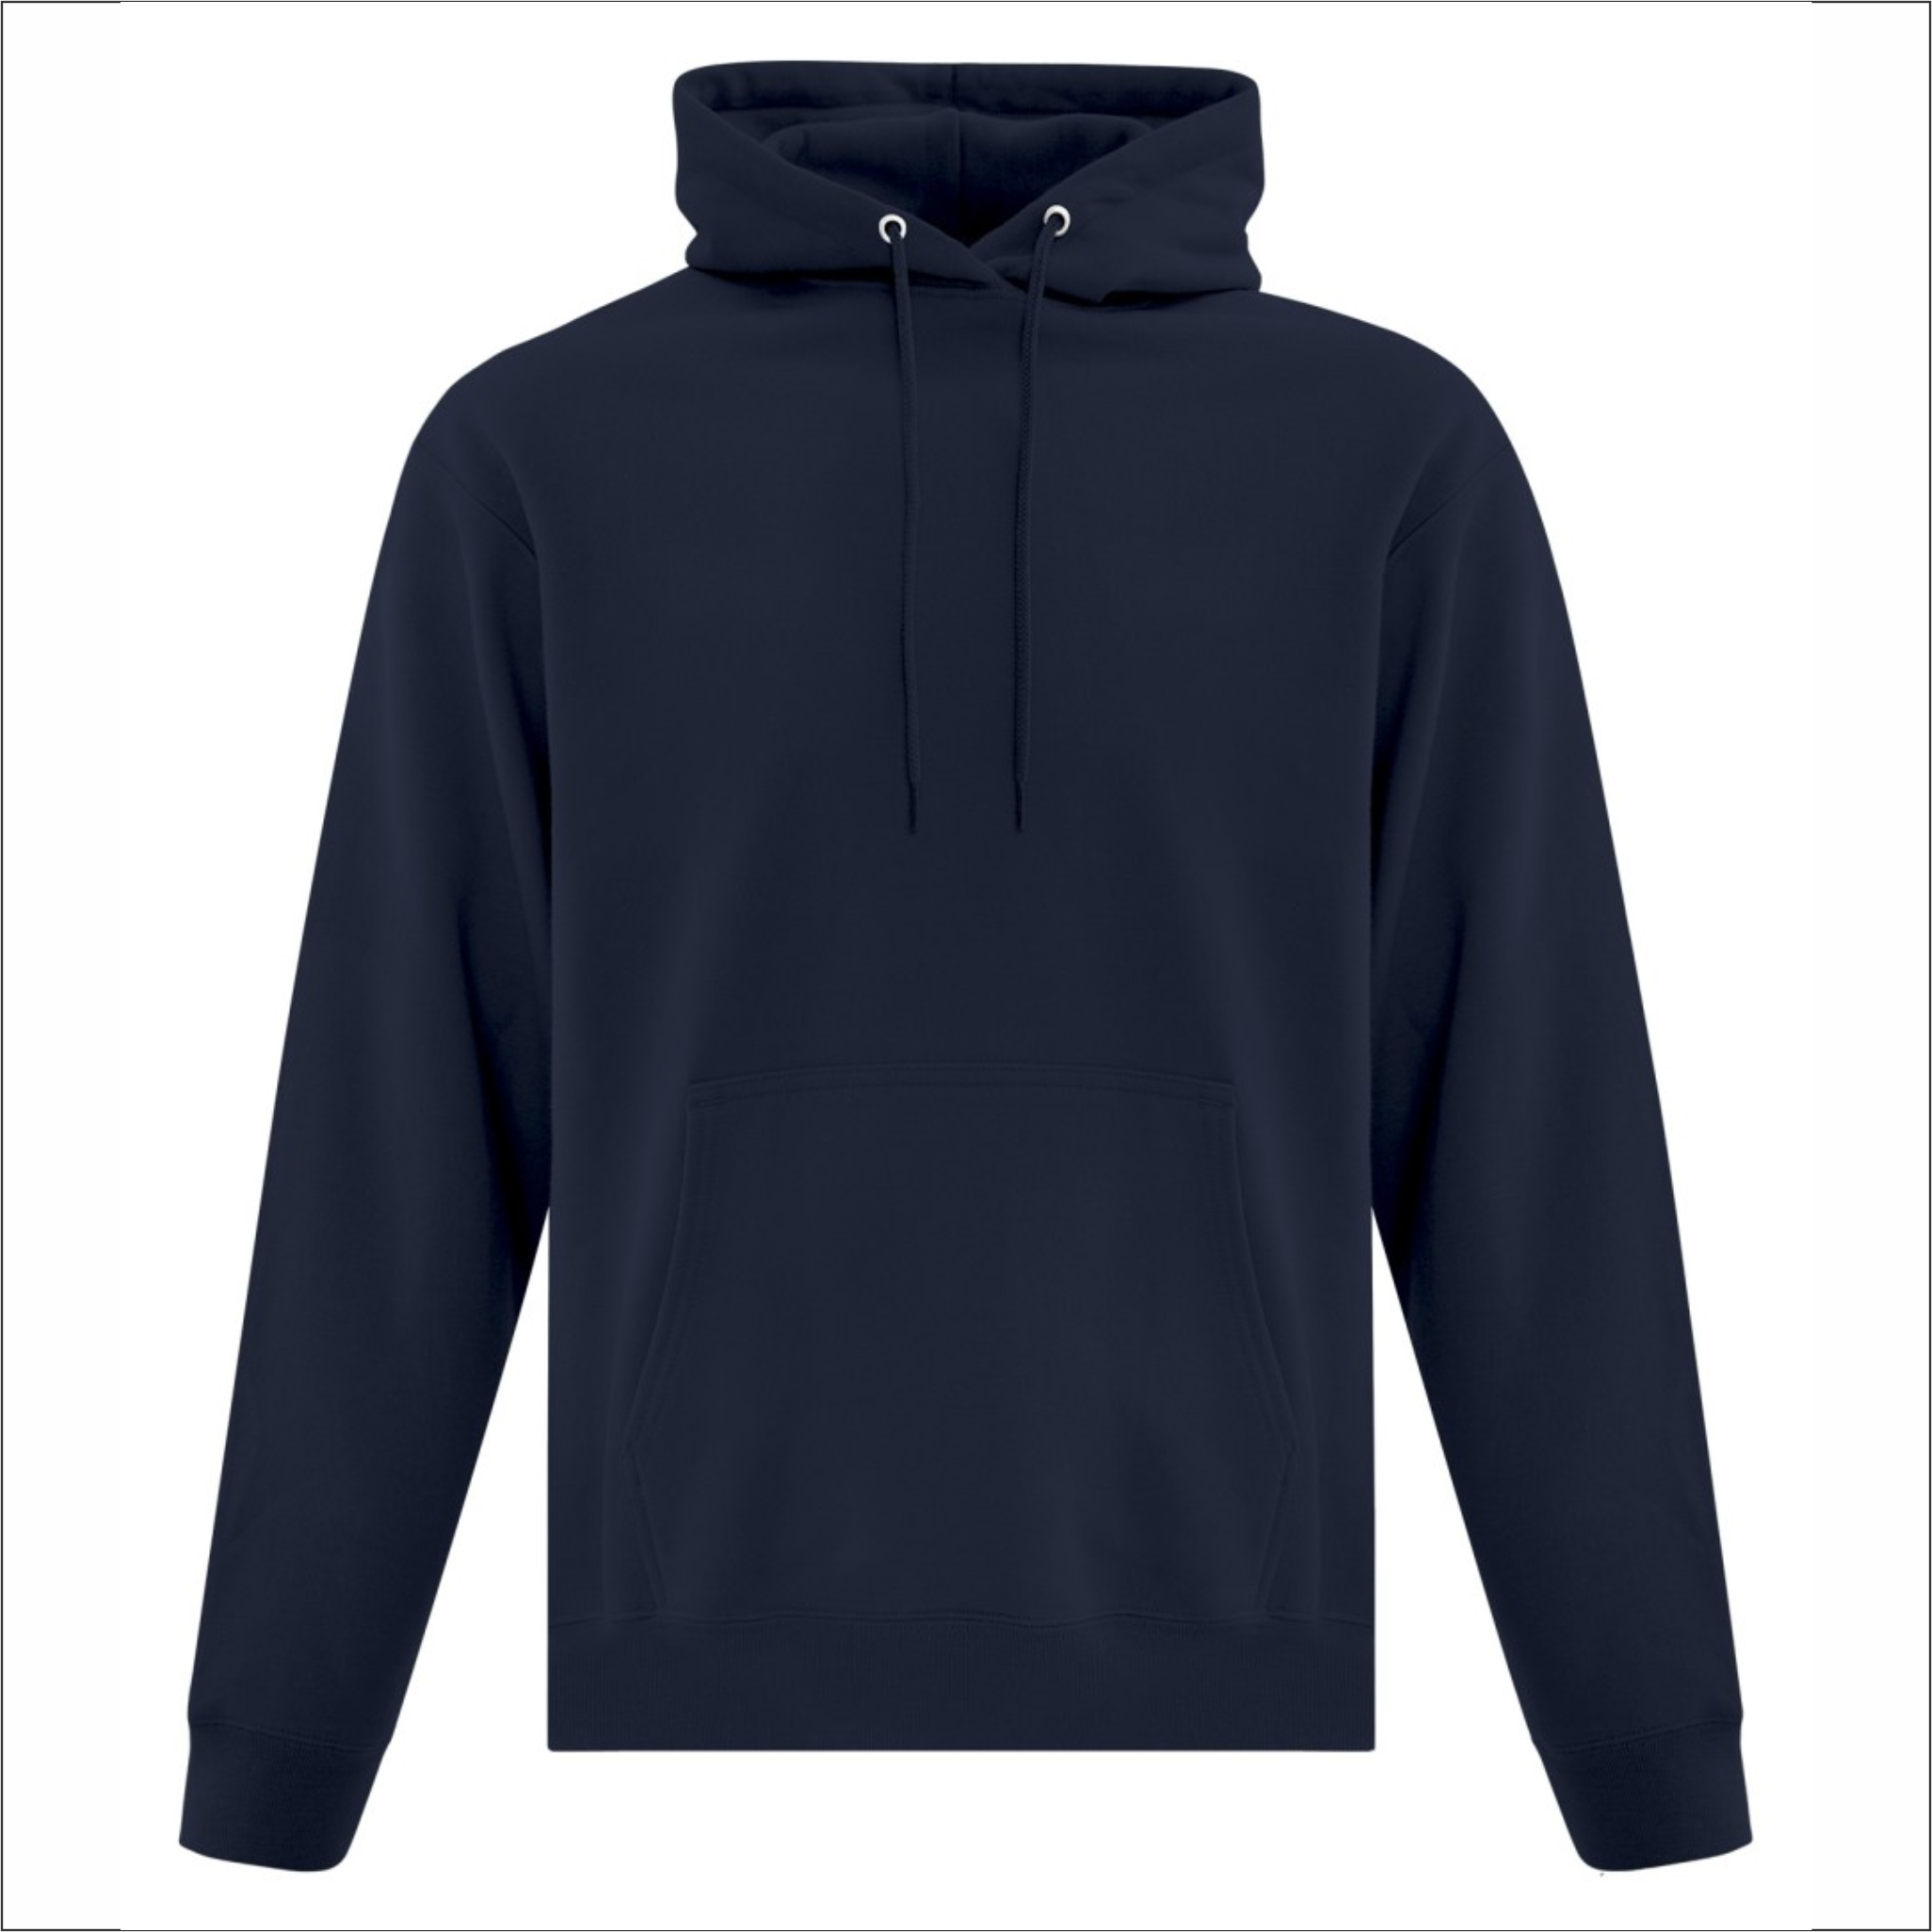 Products Adult Hoodie - Dark Navy Cotton/Polyester - ATC F2500